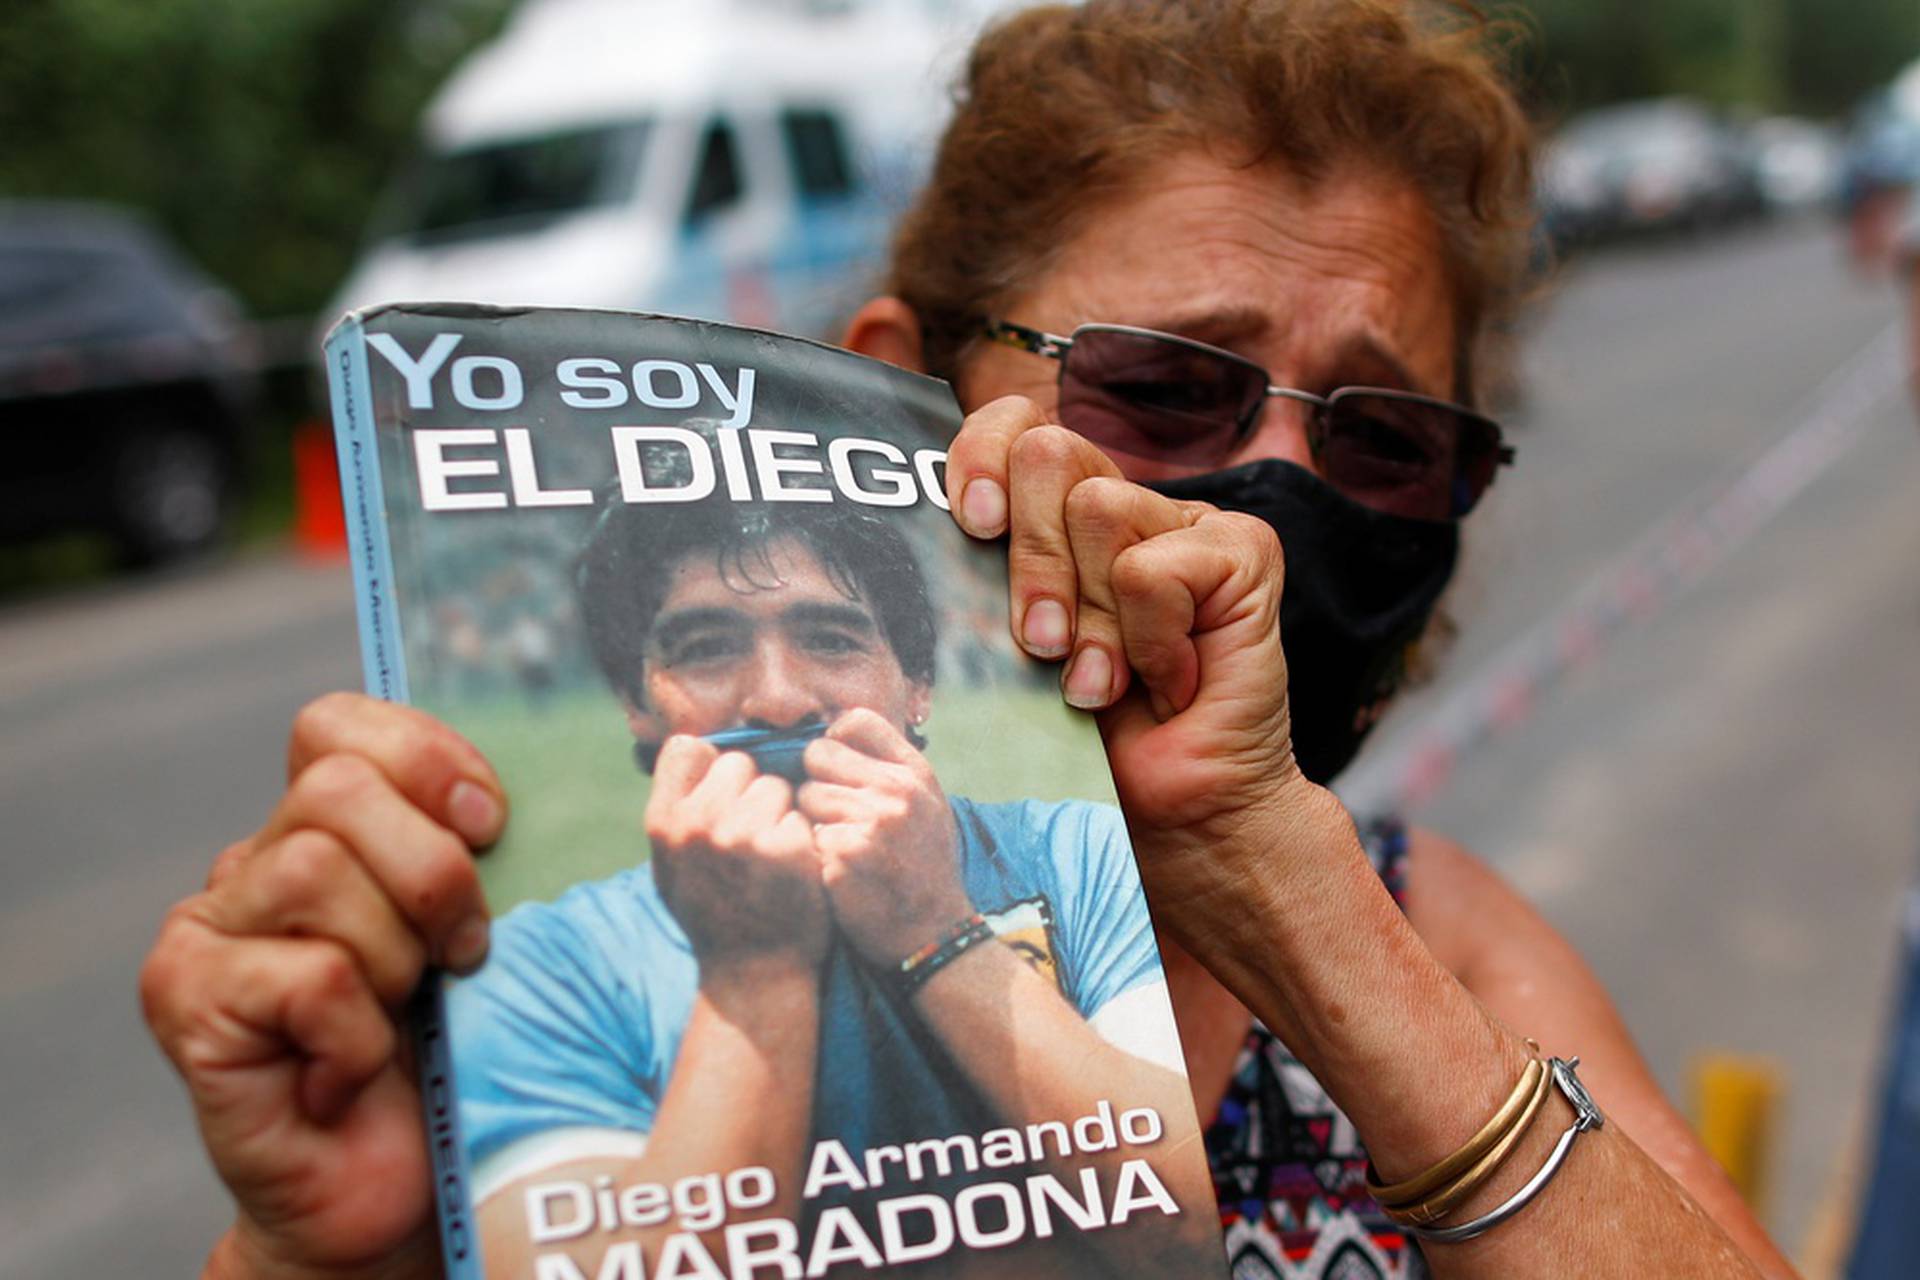 Woman holds a book "Yo soy el Diego" outside the house where Diego Maradona was staying, in Tigre